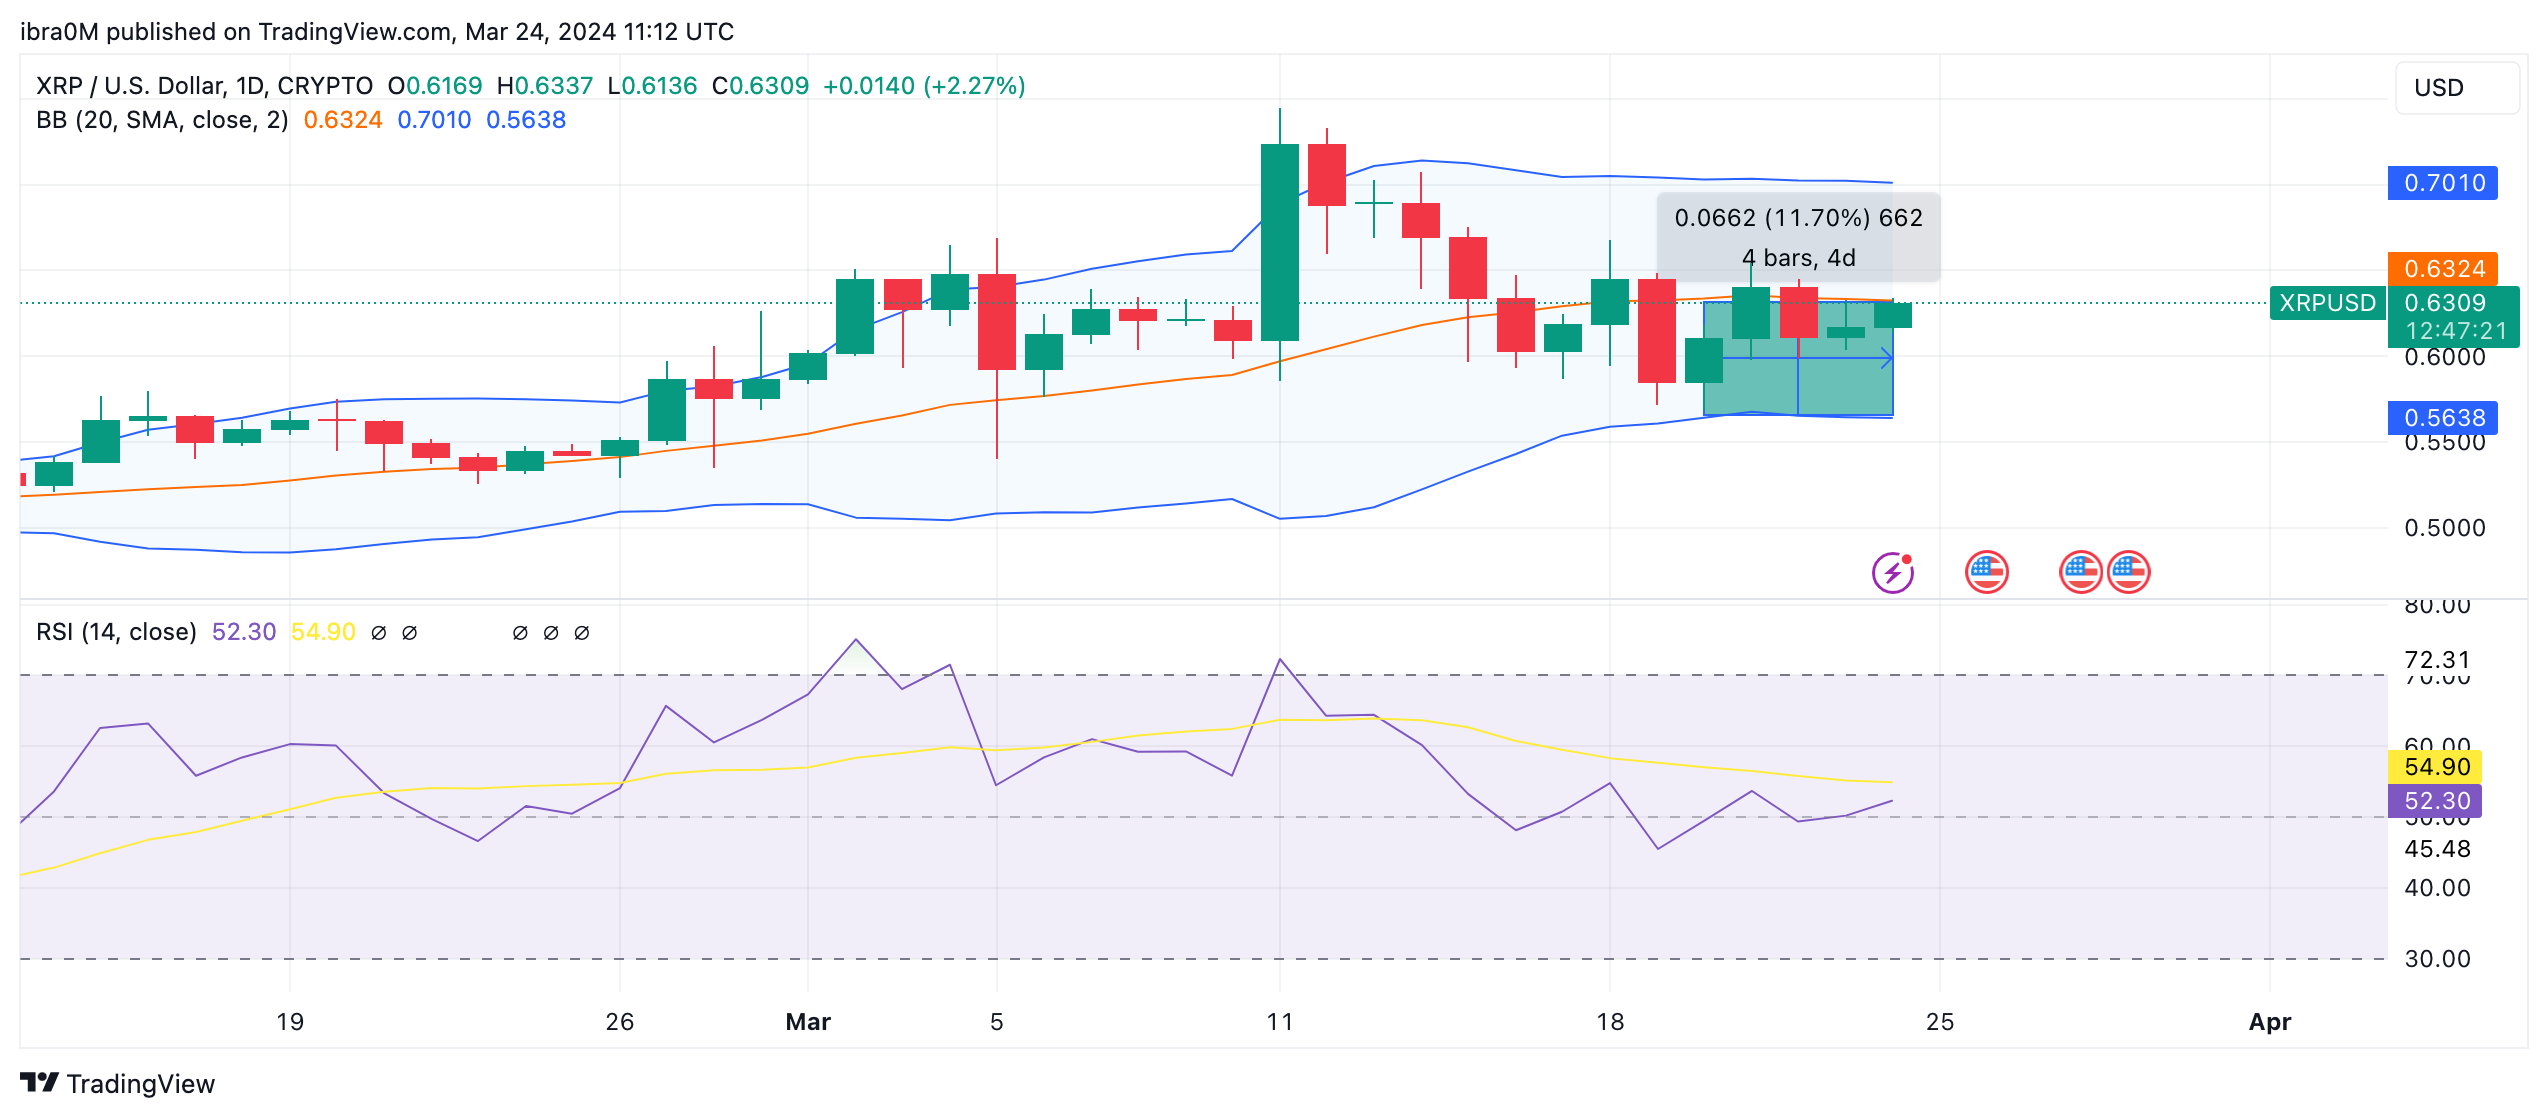 Ripple (XRP) price forecast, March 2024 | Source: TradingView